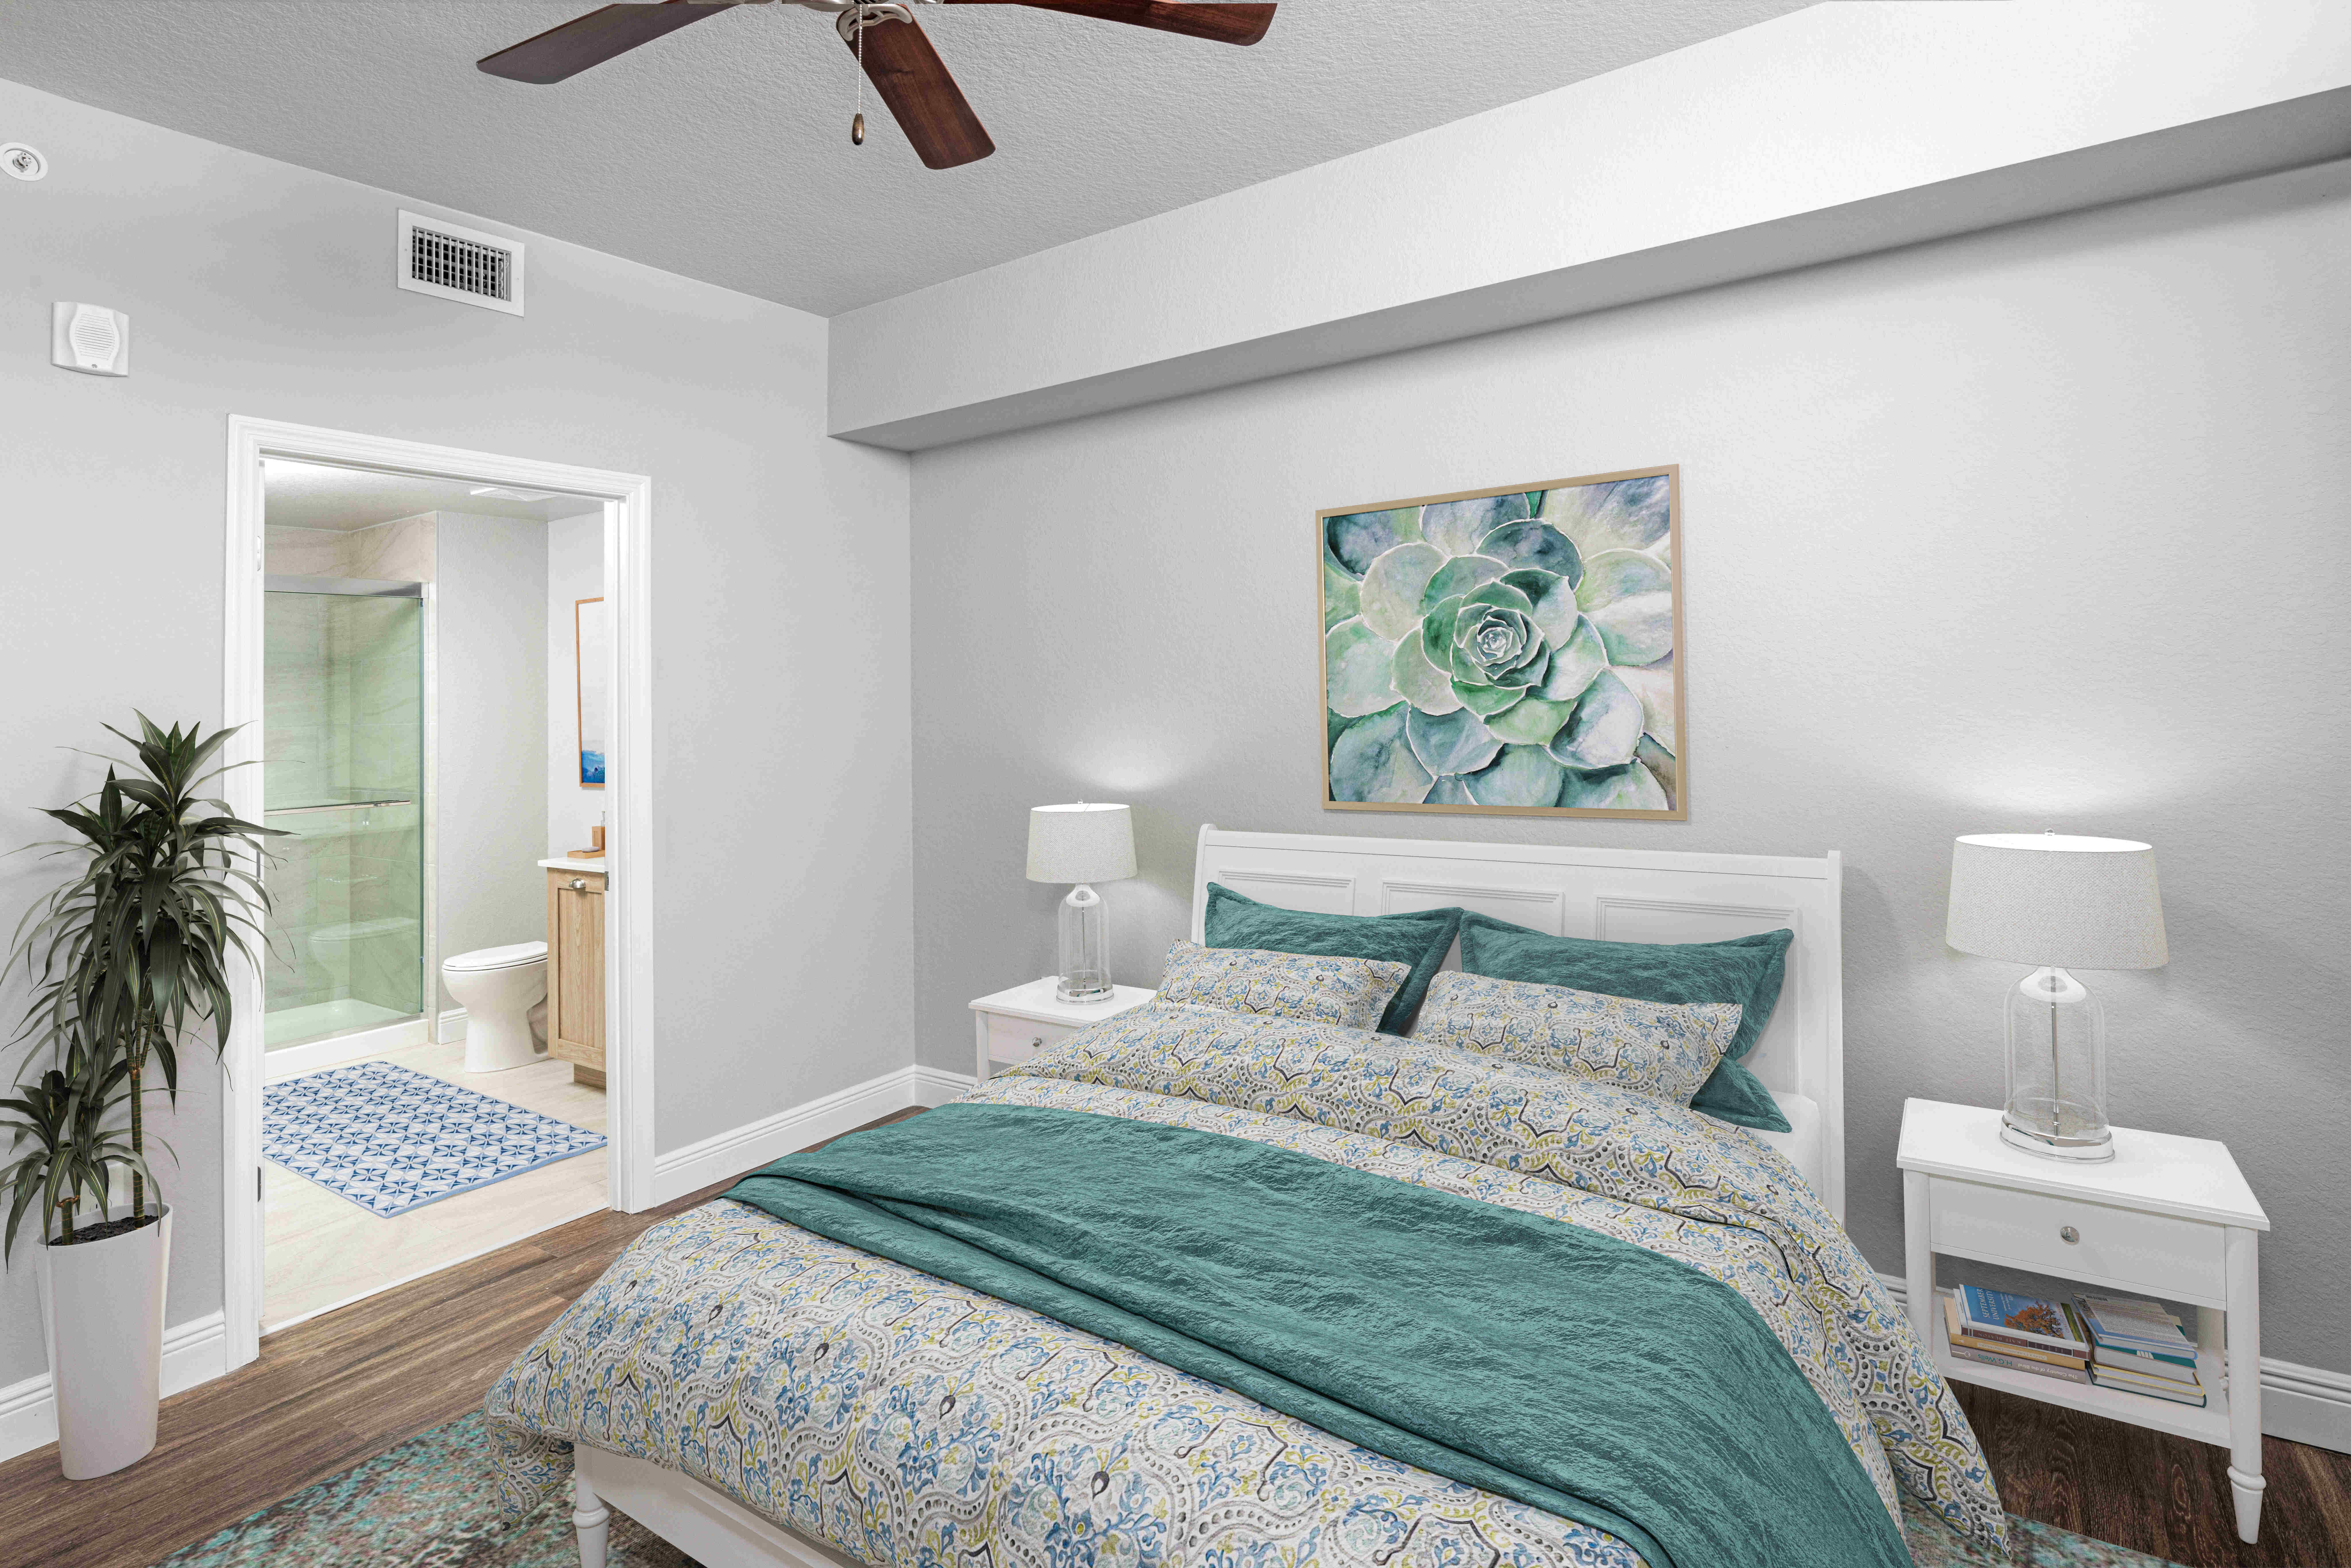 Indulge in the comfort of a furnished apartment model bedroom at Locklyn West Palm in West Palm Beach, Florida, adorned with natural light, modern furnishings, and wood-style flooring